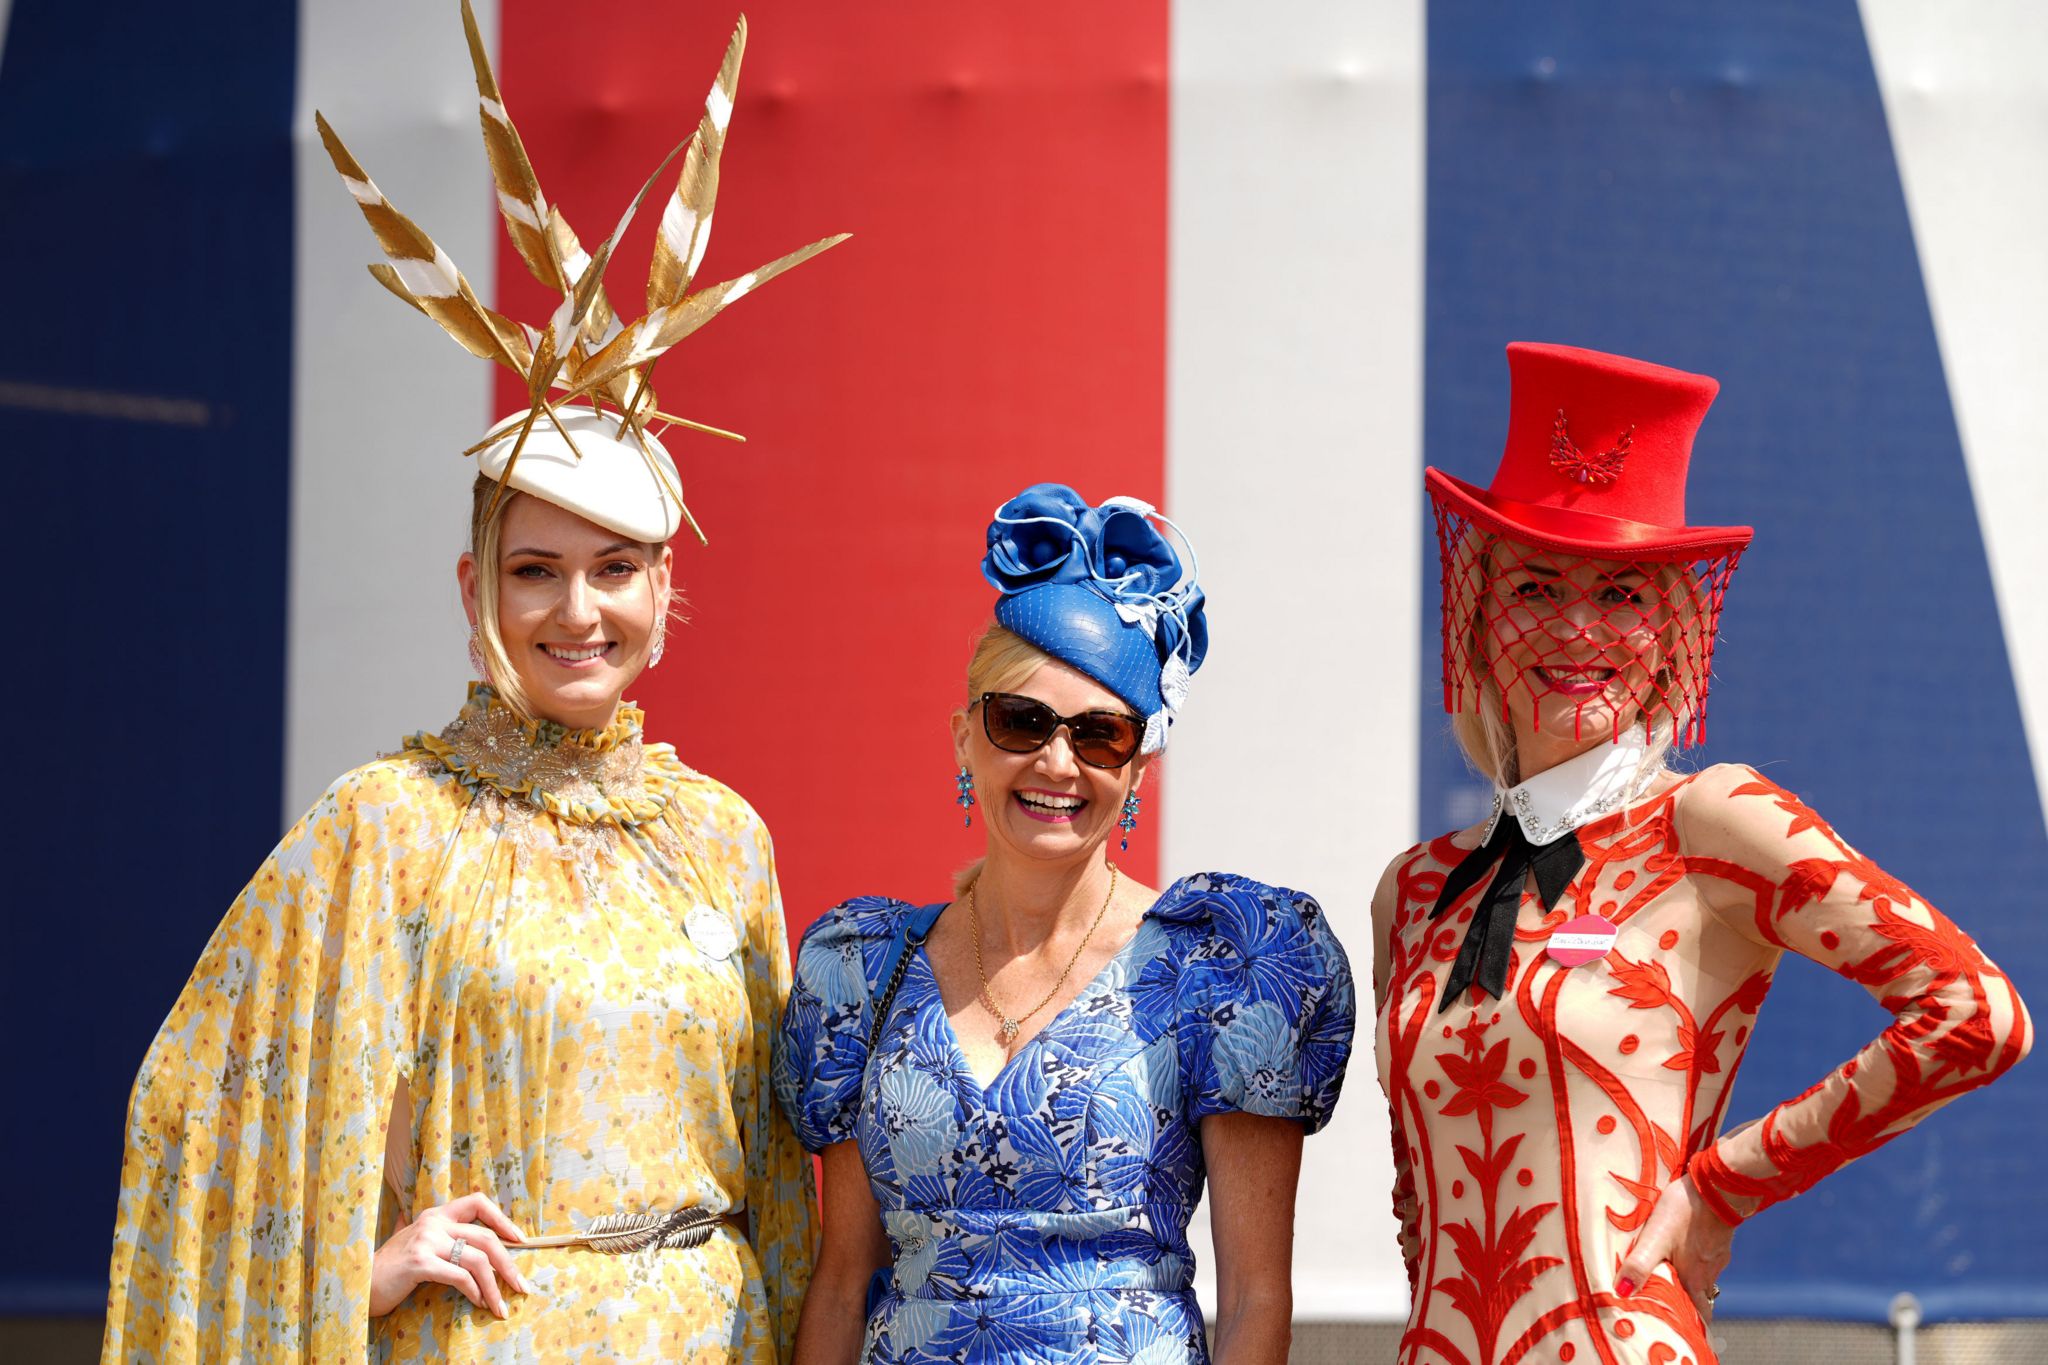 In pictures: Millinery masterpieces at Royal Ascot Ladies Day - BBC News